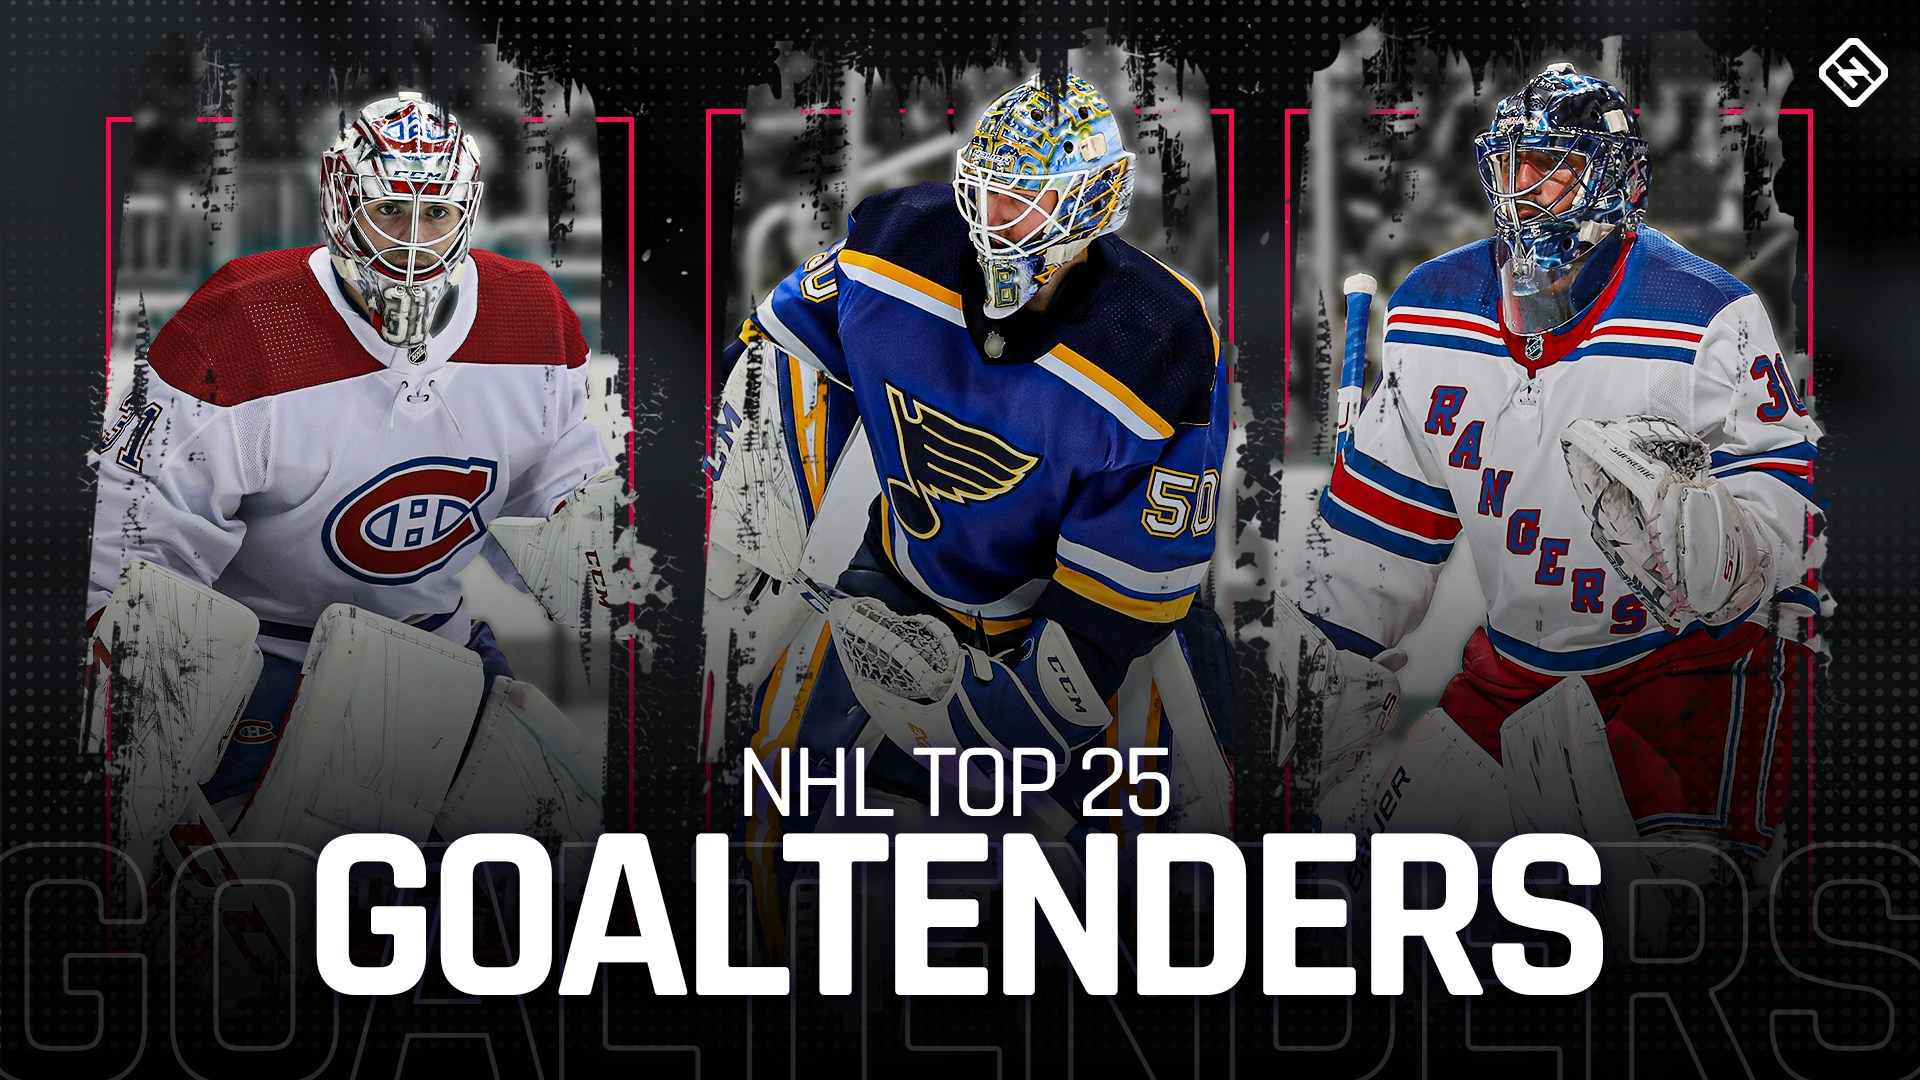 Ranking the top 25 NHL goaltenders in 